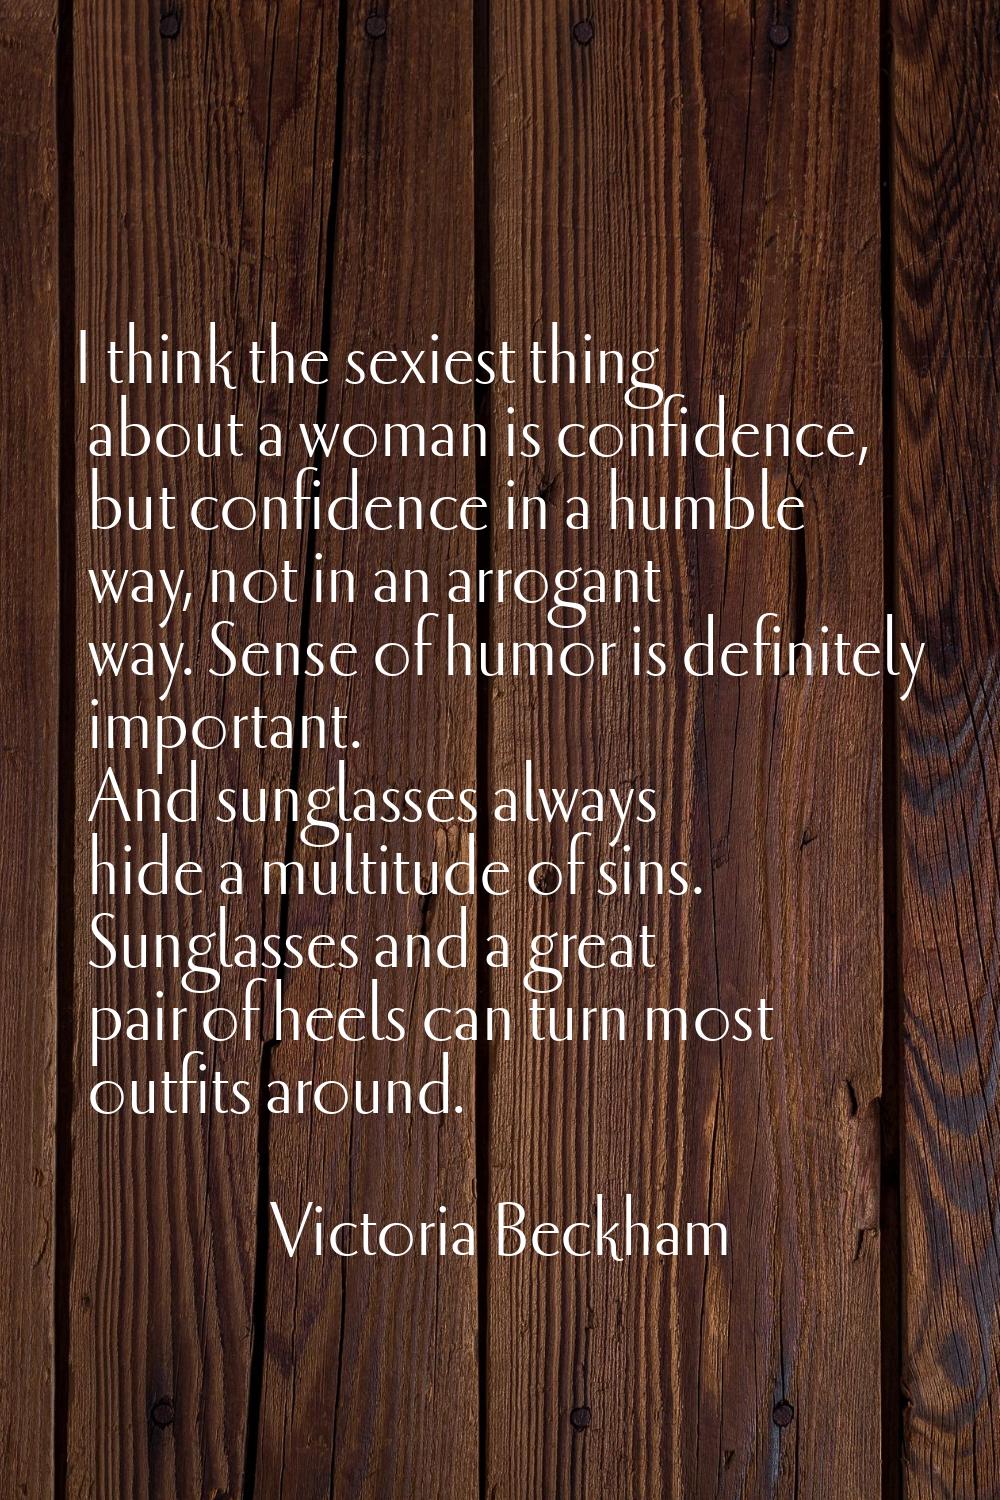 I think the sexiest thing about a woman is confidence, but confidence in a humble way, not in an ar